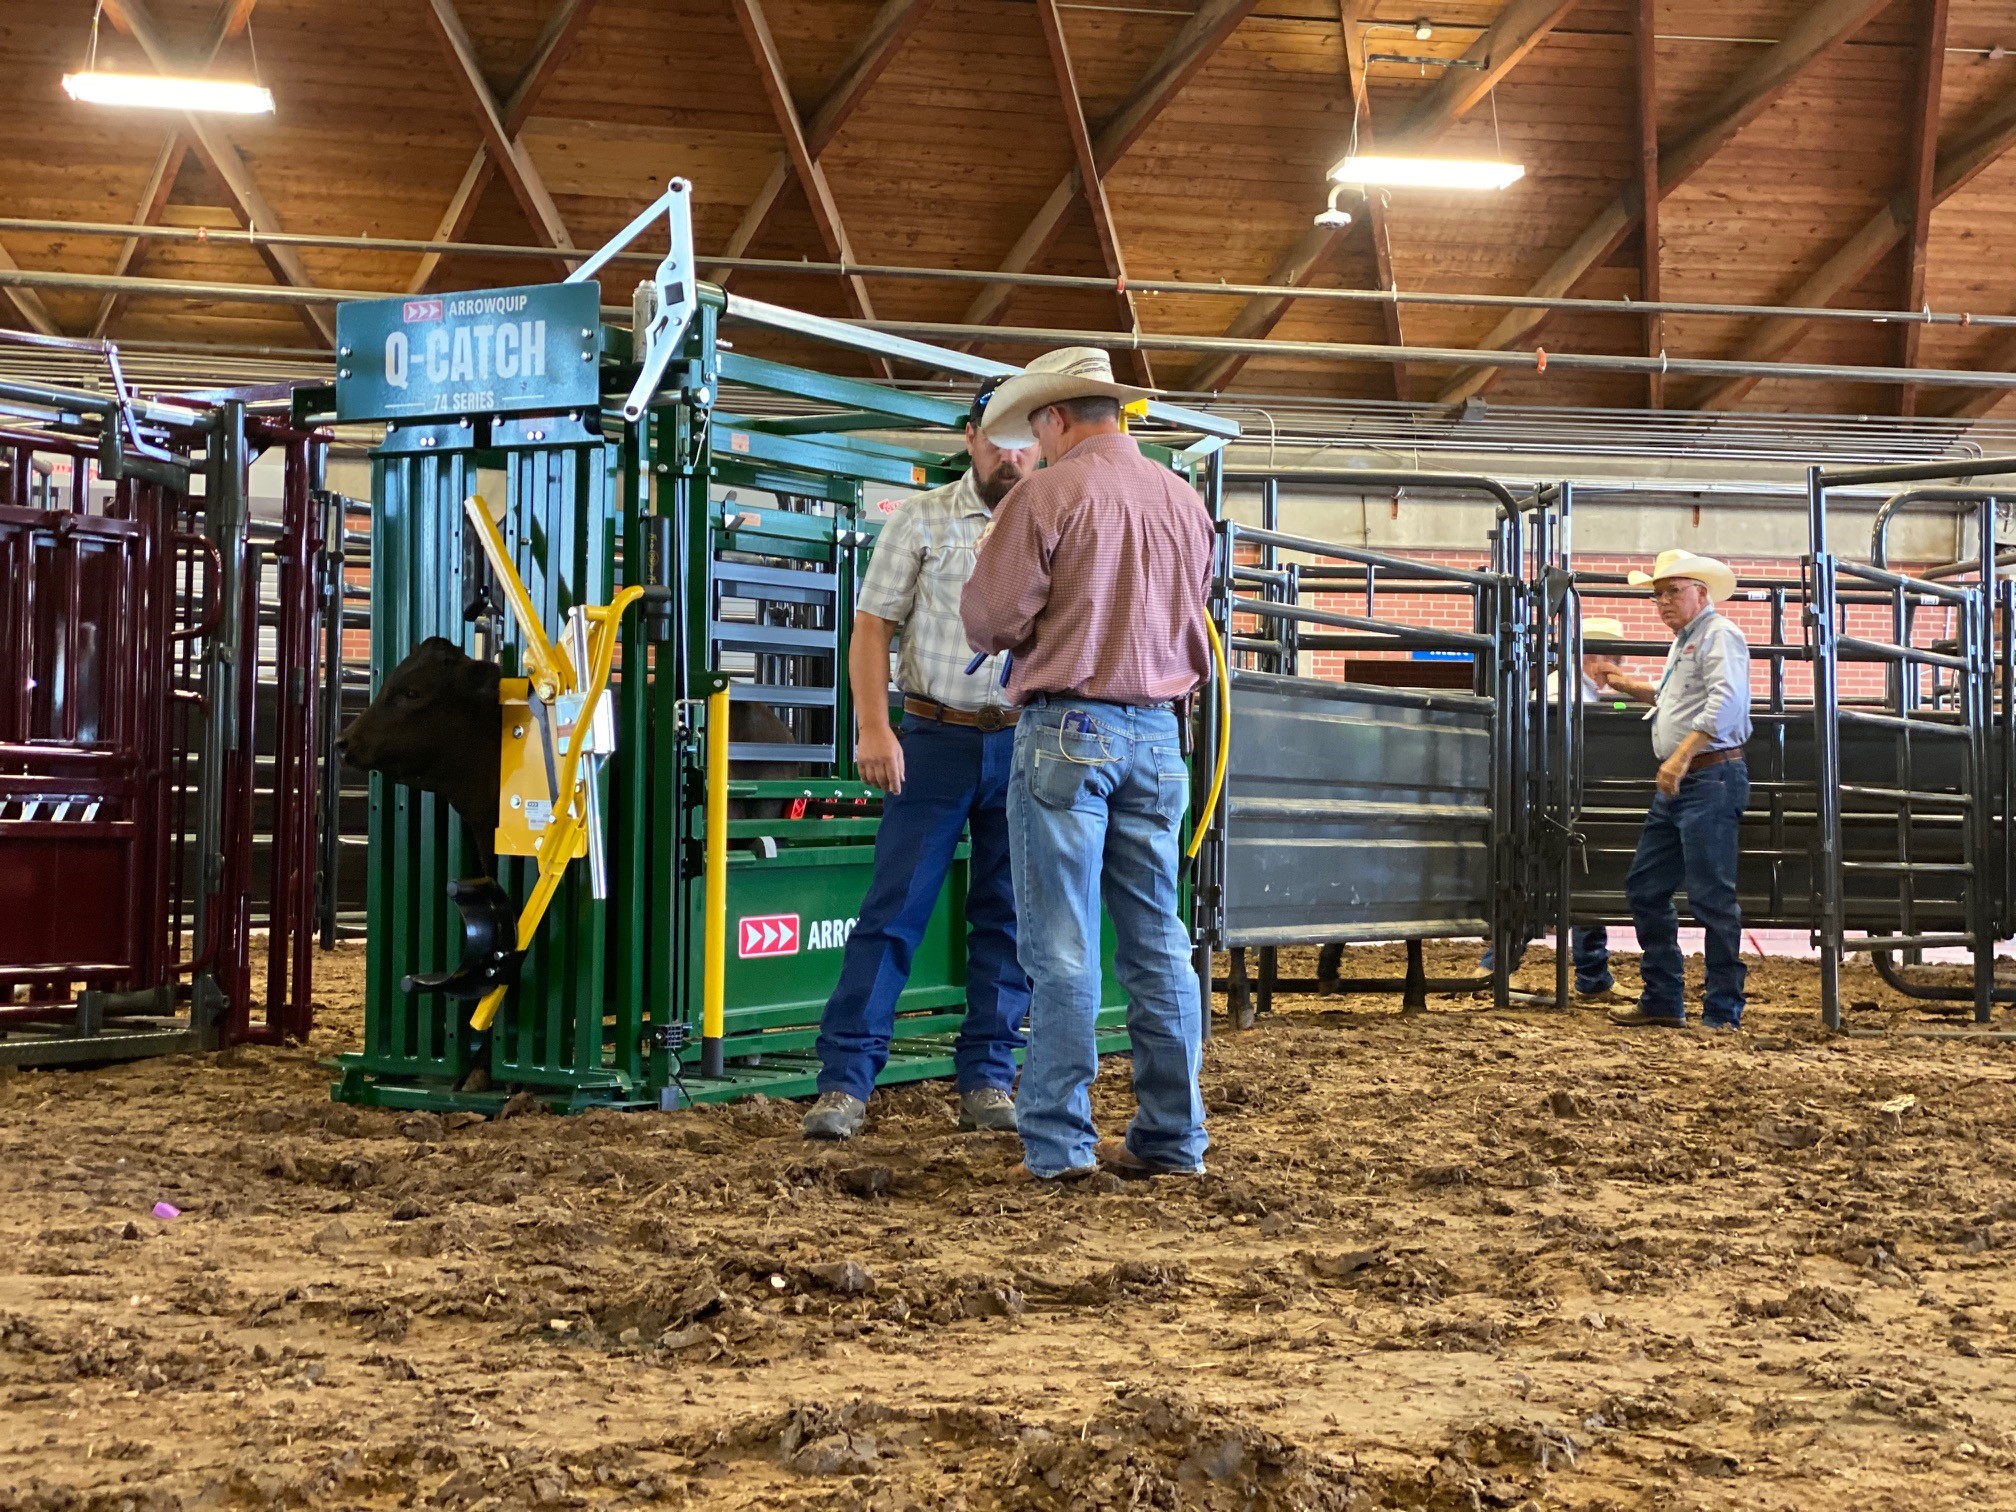 Cattle Producers Get First Hand Look At Cattle Handling Equipment At Oklahoma City Farm Show